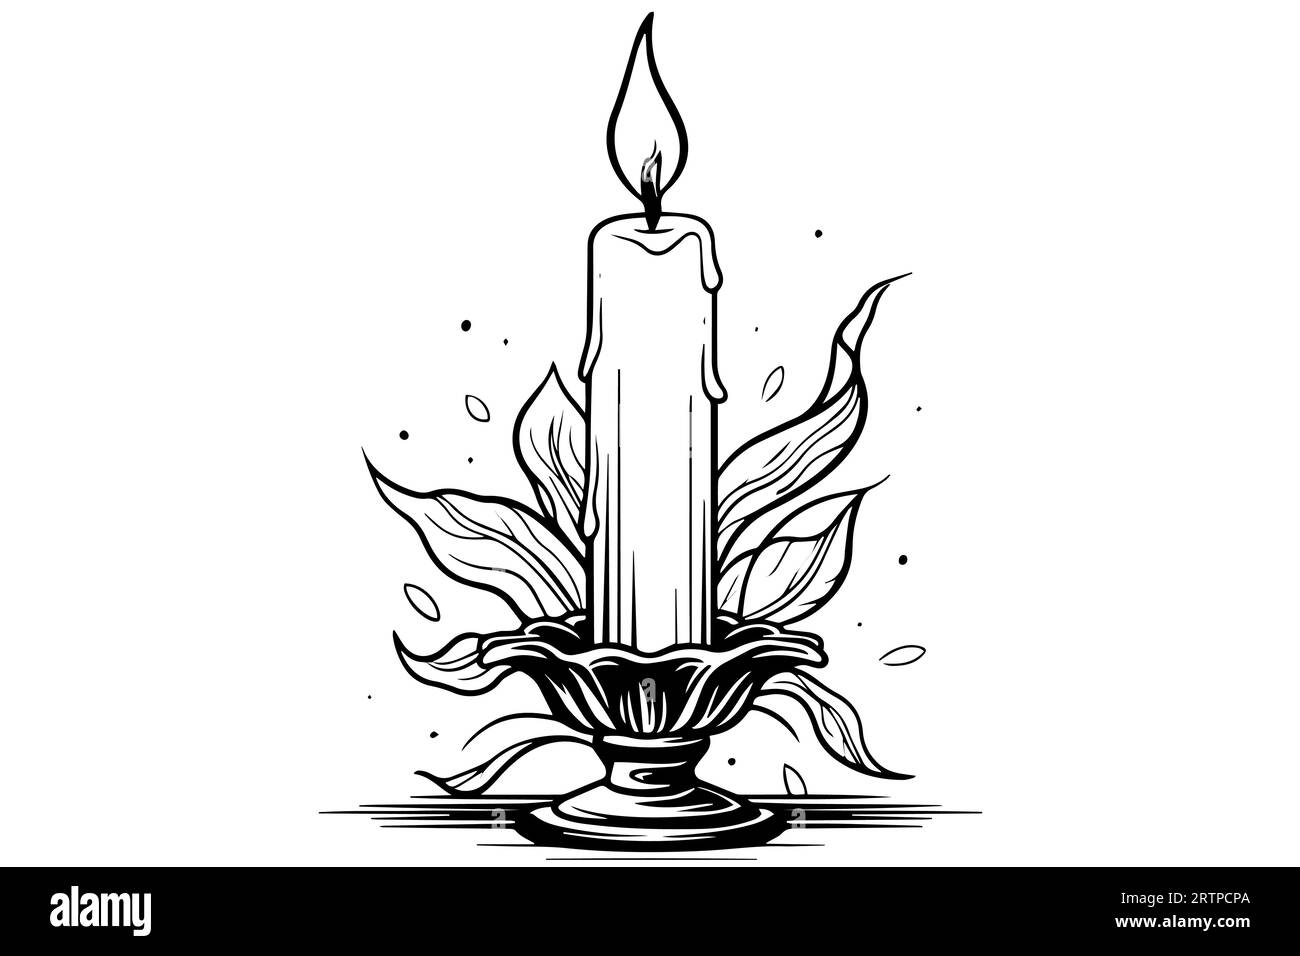 How To Draw a Candle - A Really Easy Candle Drawing